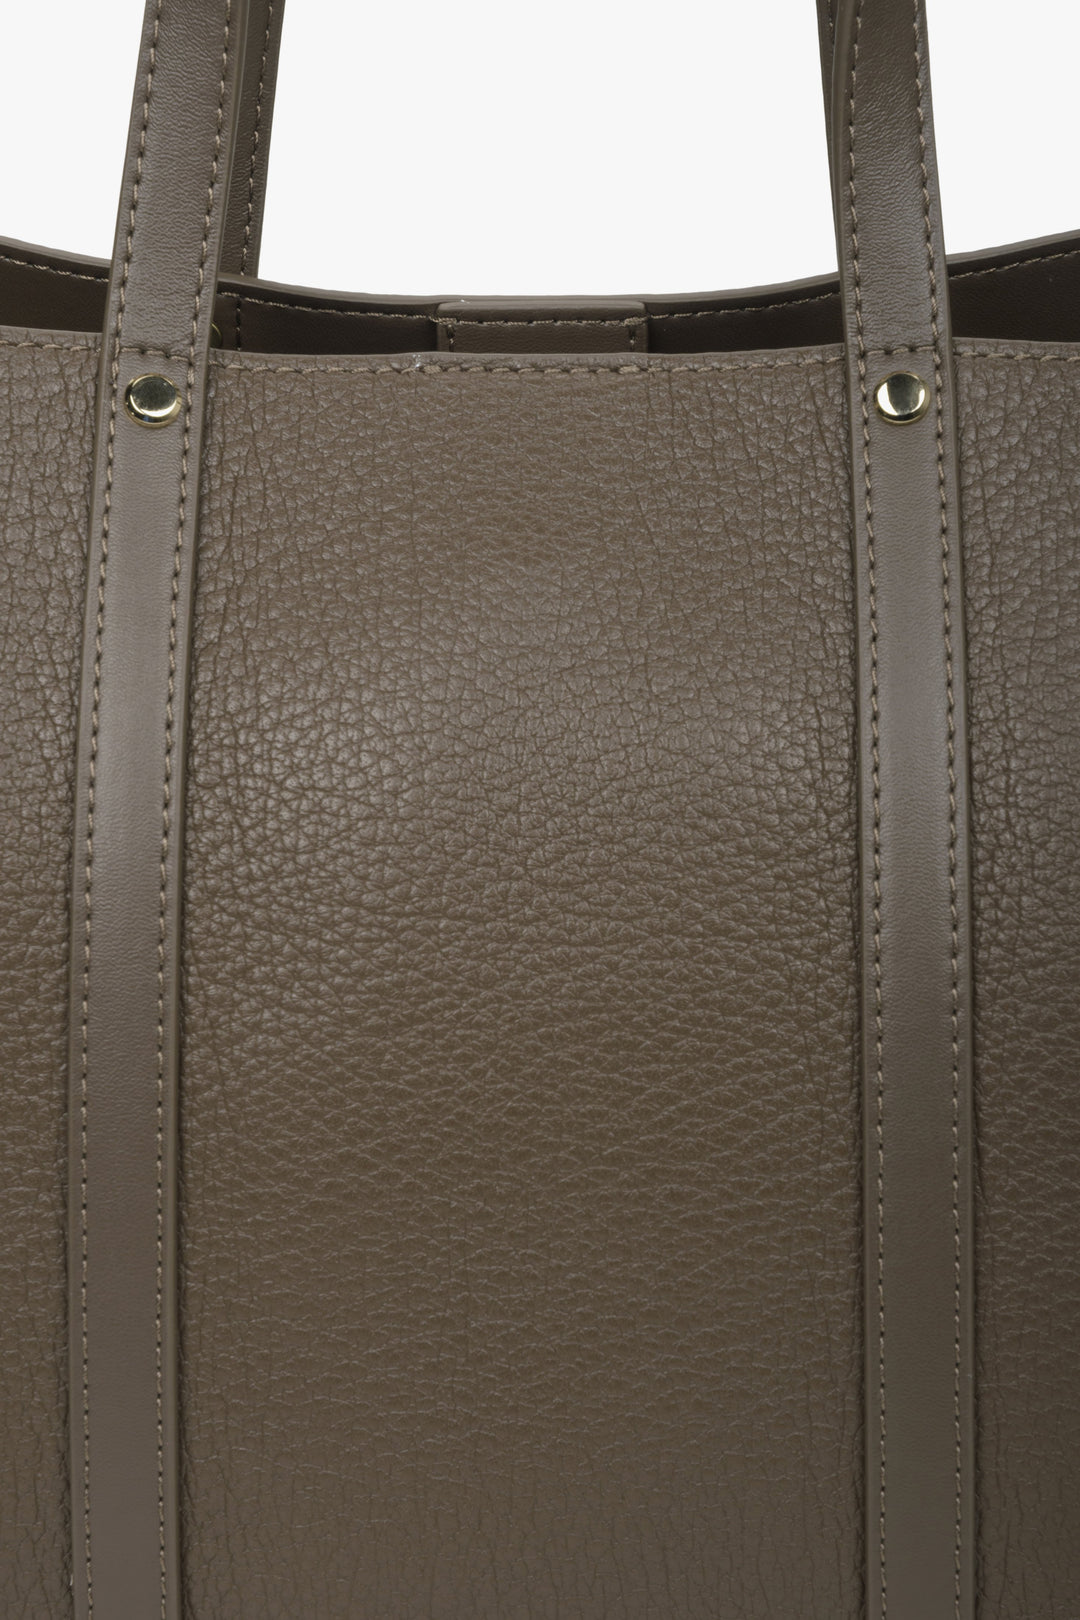 Women's brown shopper bag made of genuine leather - close-up on details.